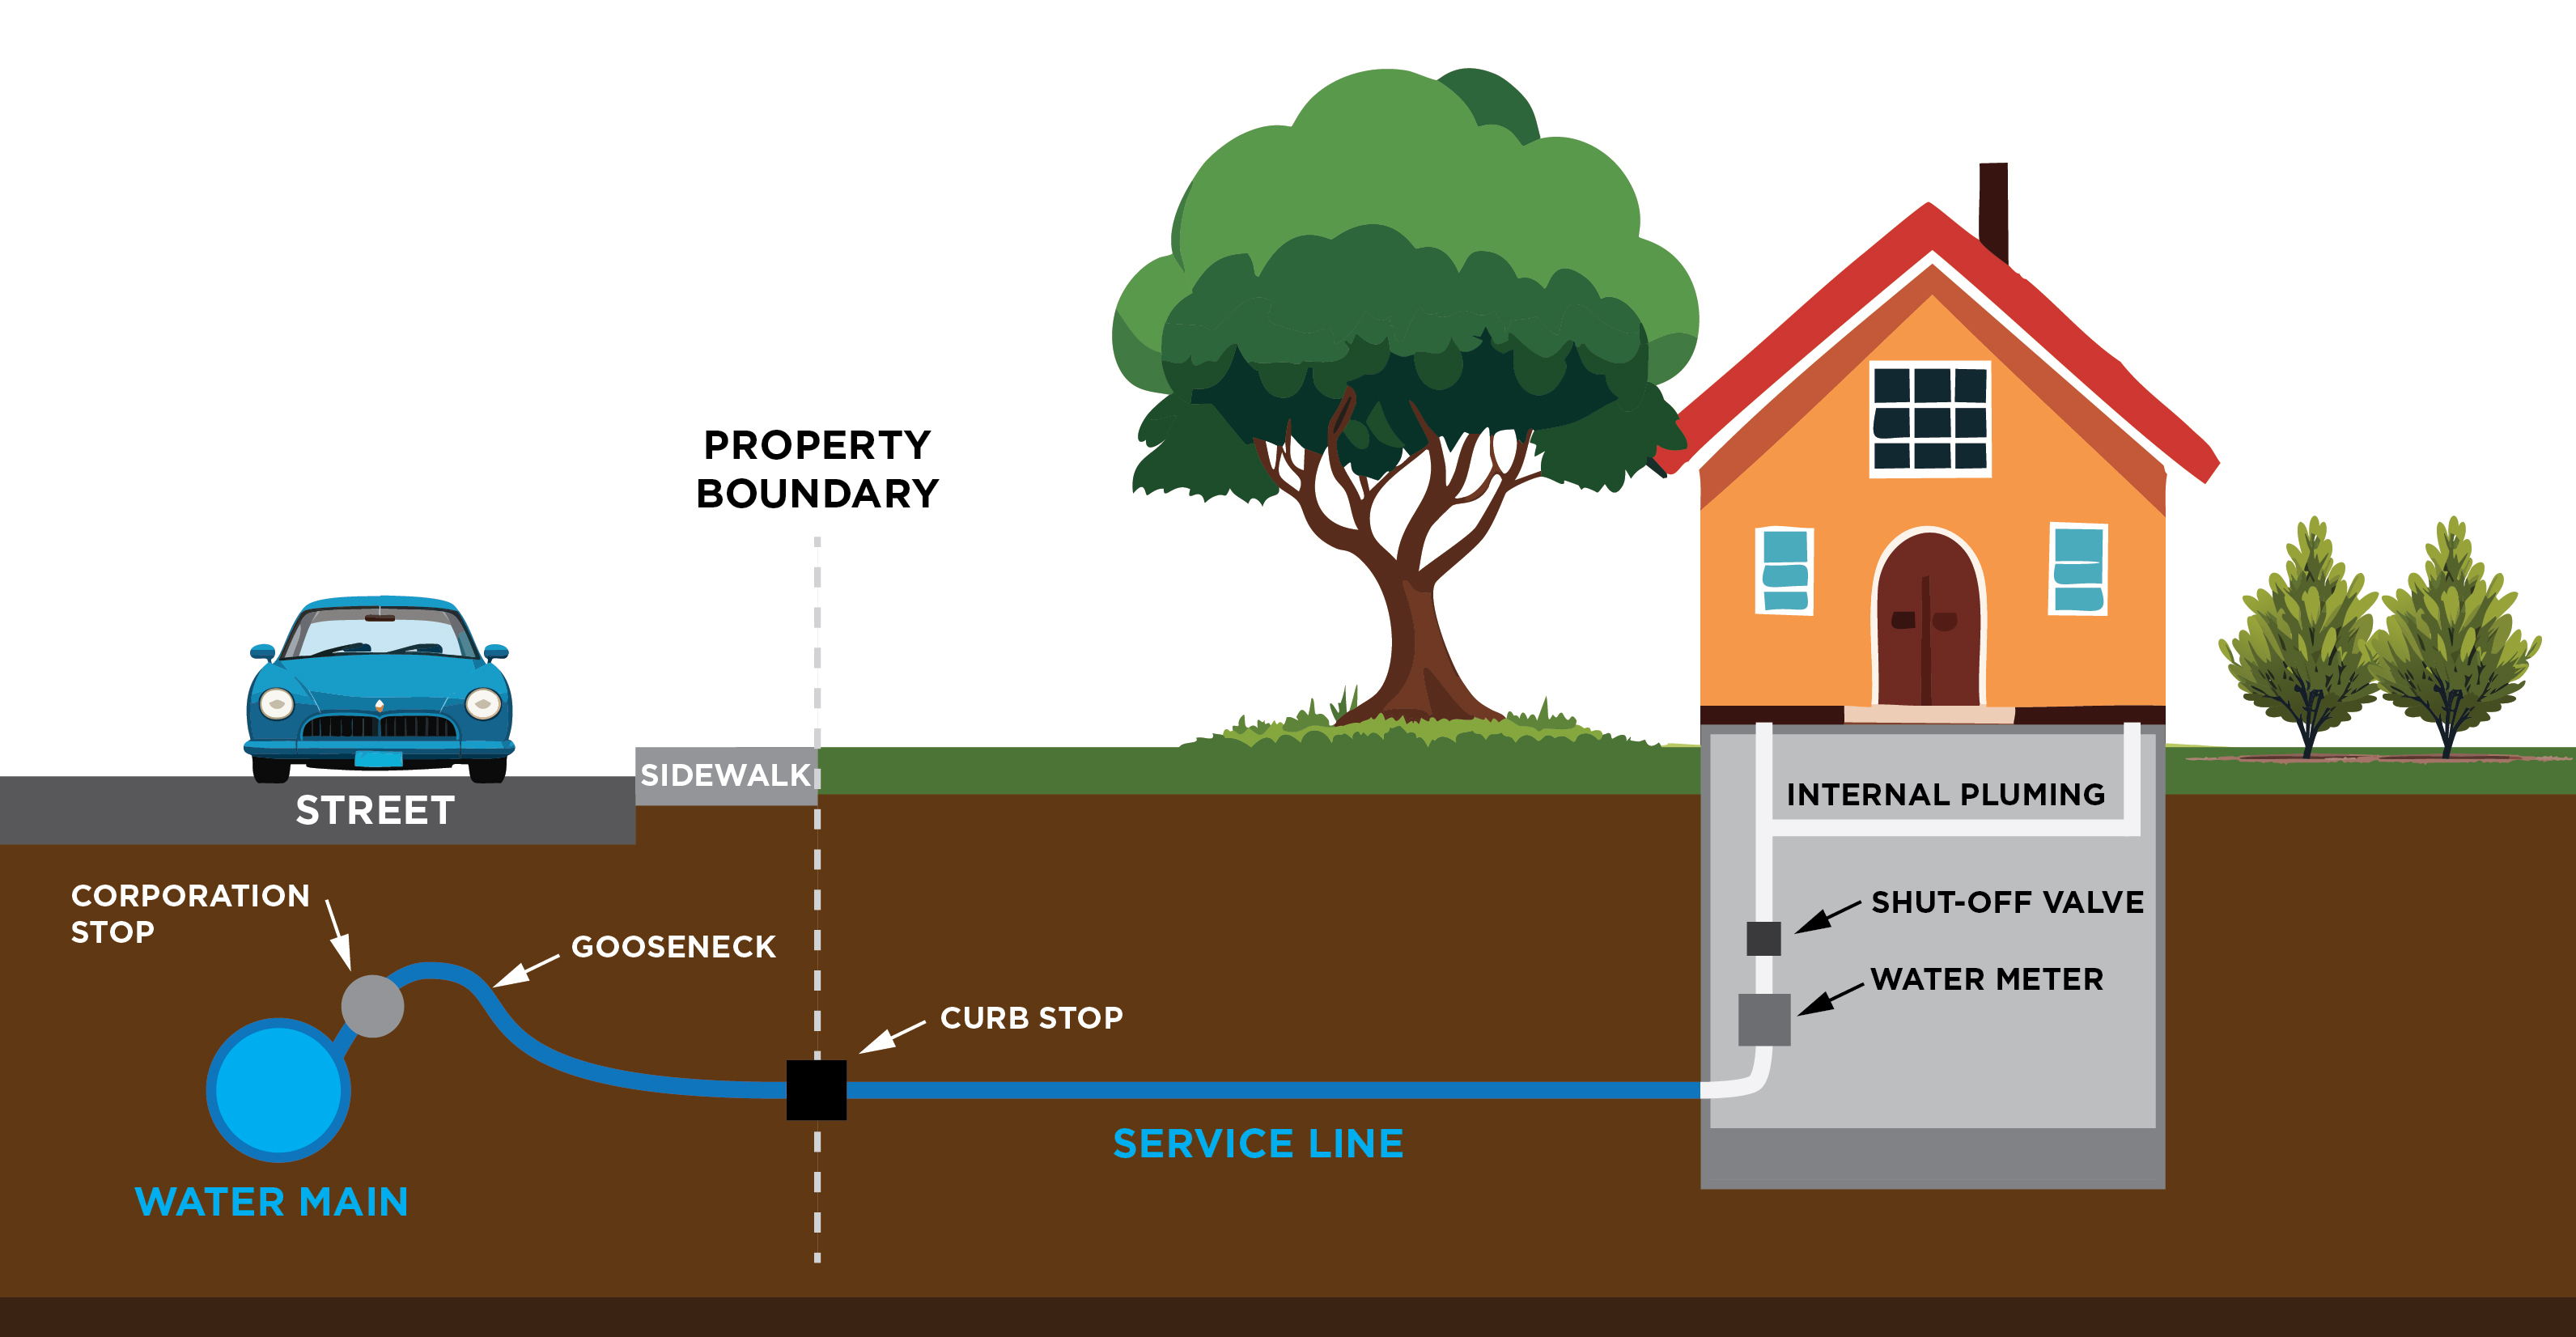 A visual showing the location of a typical water service line that would need to be replaced.